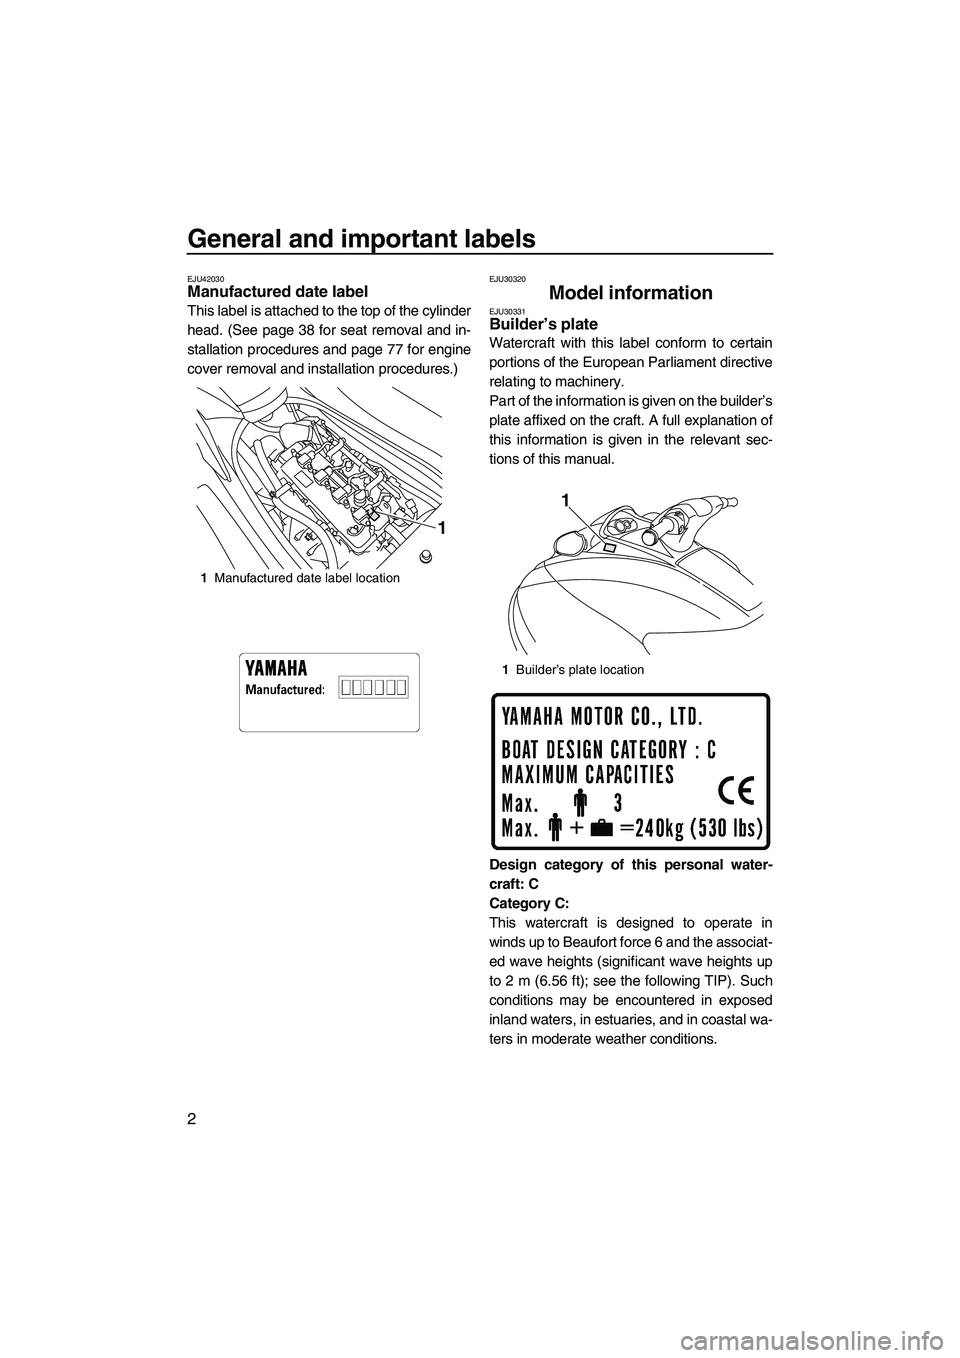 YAMAHA VXS 2013  Owners Manual General and important labels
2
EJU42030Manufactured date label 
This label is attached to the top of the cylinder
head. (See page 38 for seat removal and in-
stallation procedures and page 77 for engi